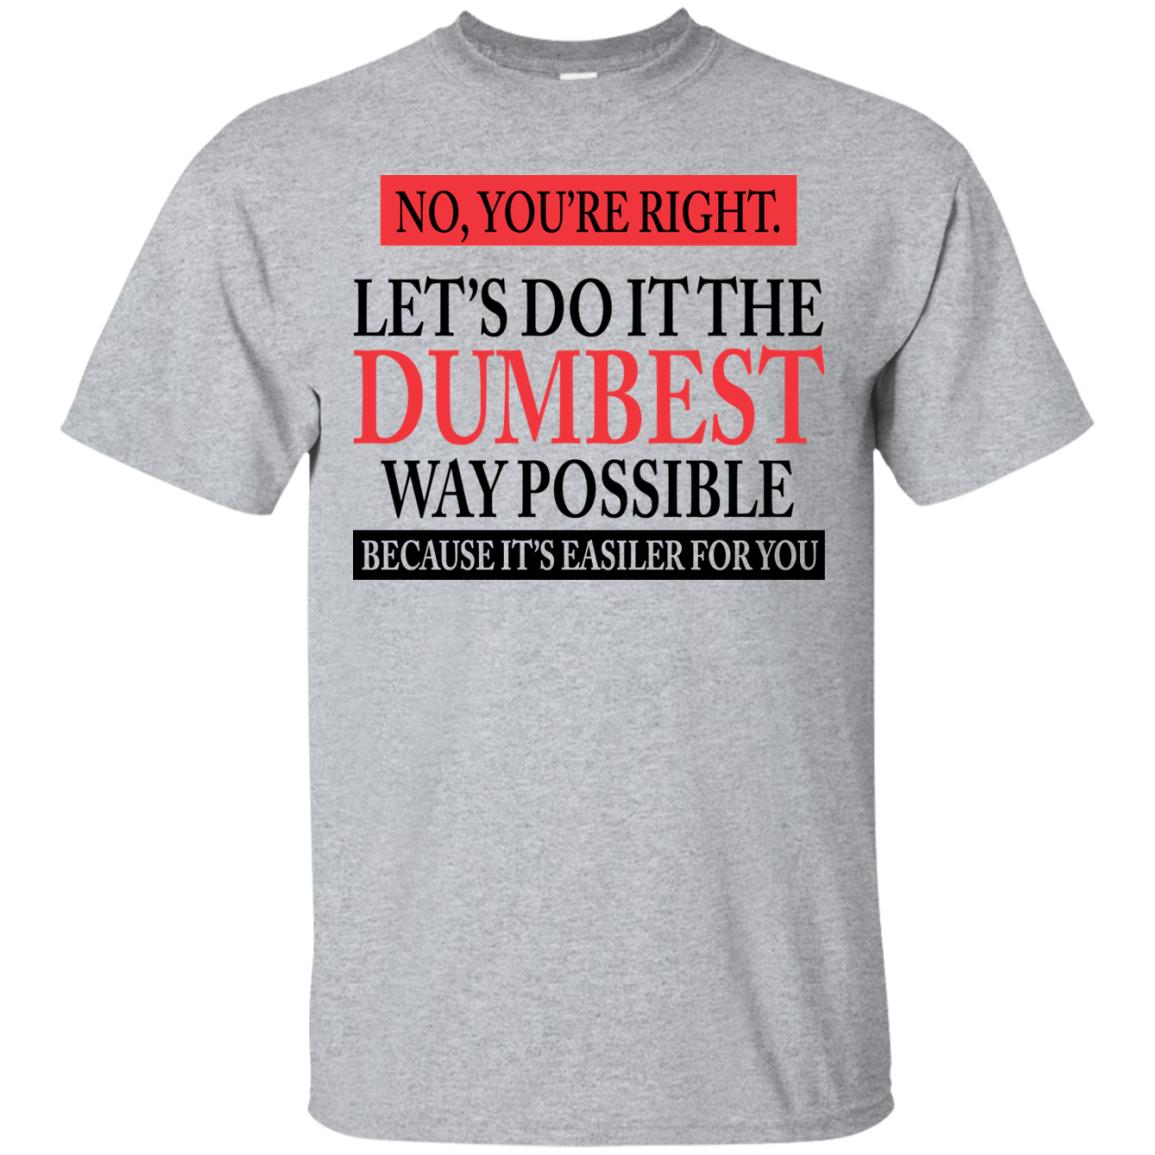 Let's Do It The Dumbest Way Possible Shirt | Allbluetees.com